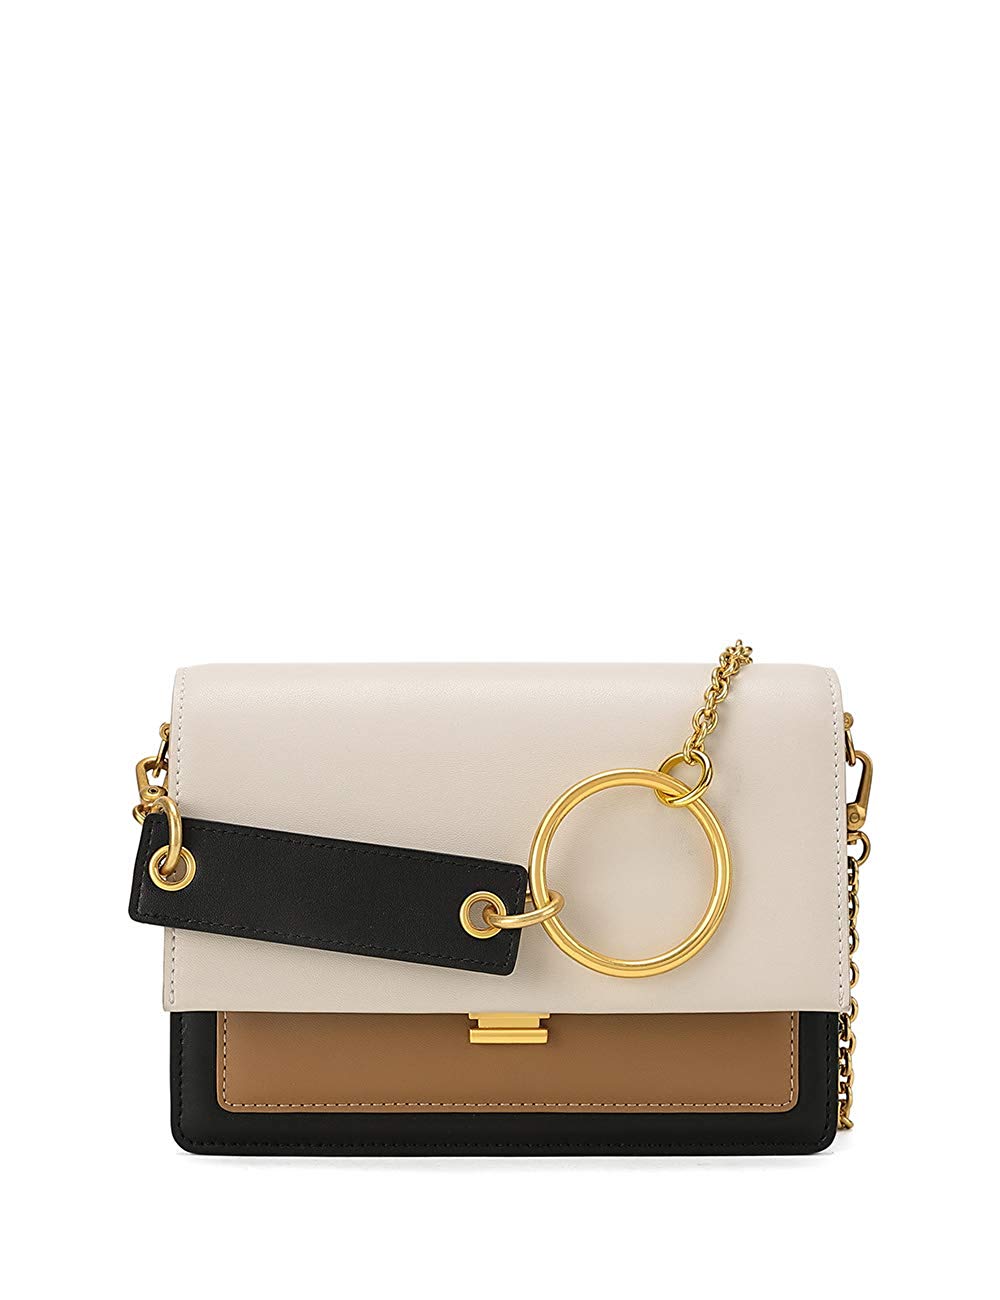 The Ultimate Guide to Designer Look Alike Purses & Bags That Look ...